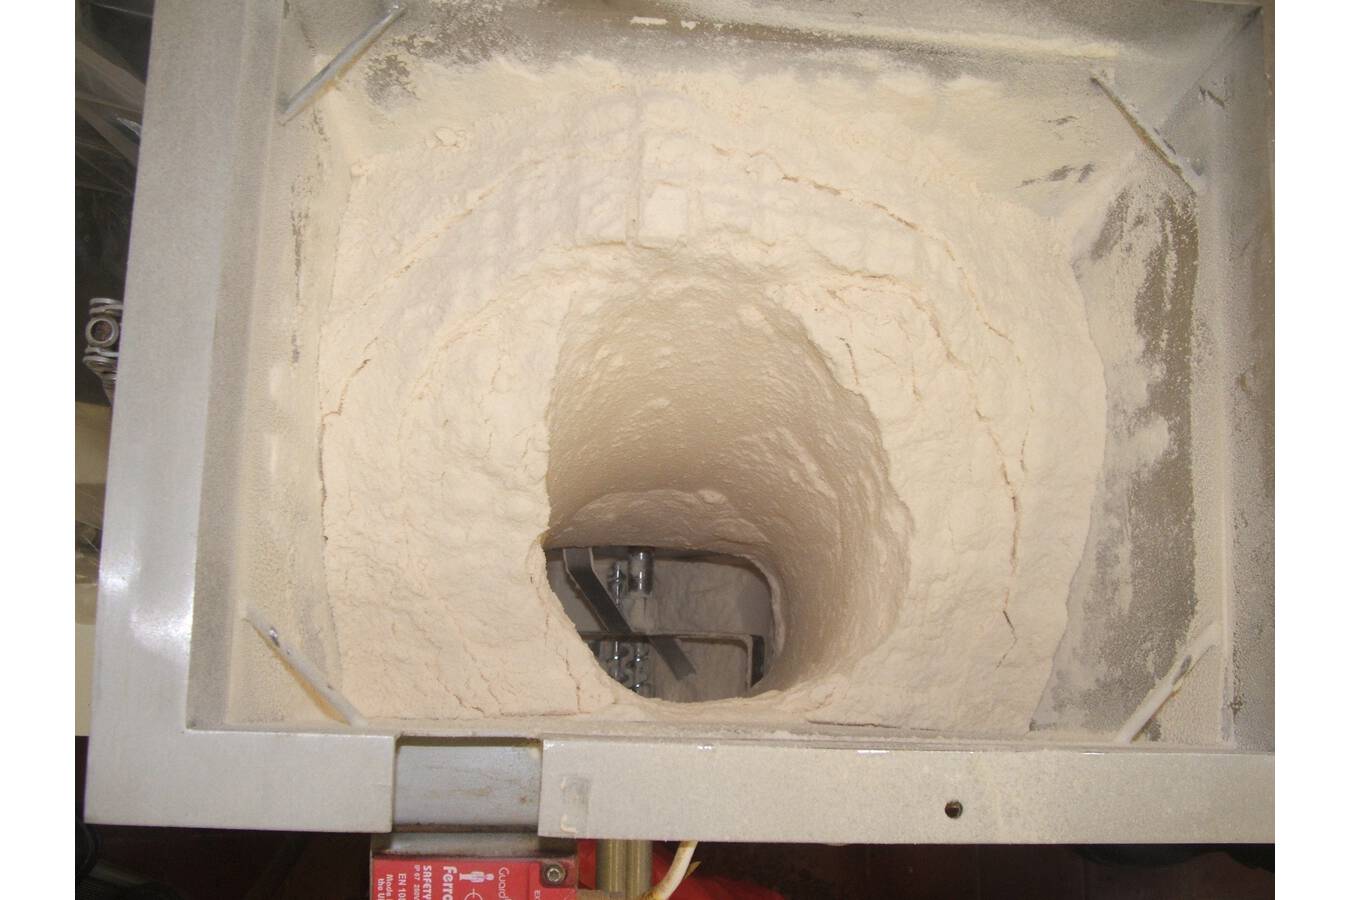 Why do your powders get stuck in a hopper?